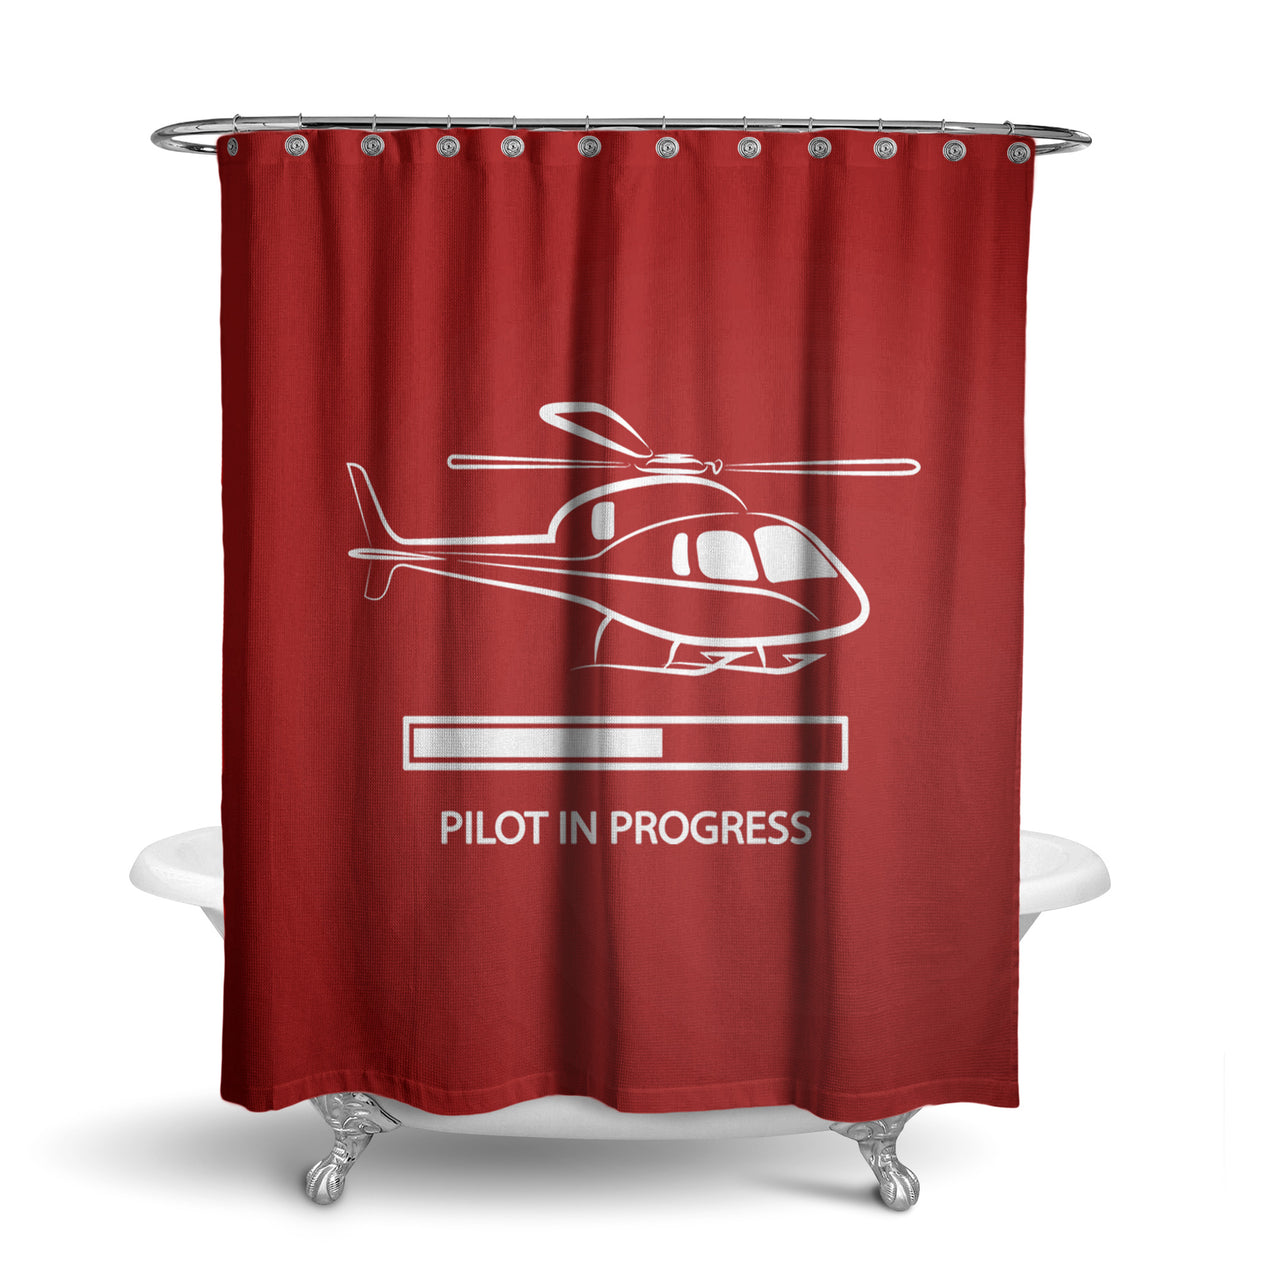 Pilot In Progress (Helicopter) Designed Shower Curtains